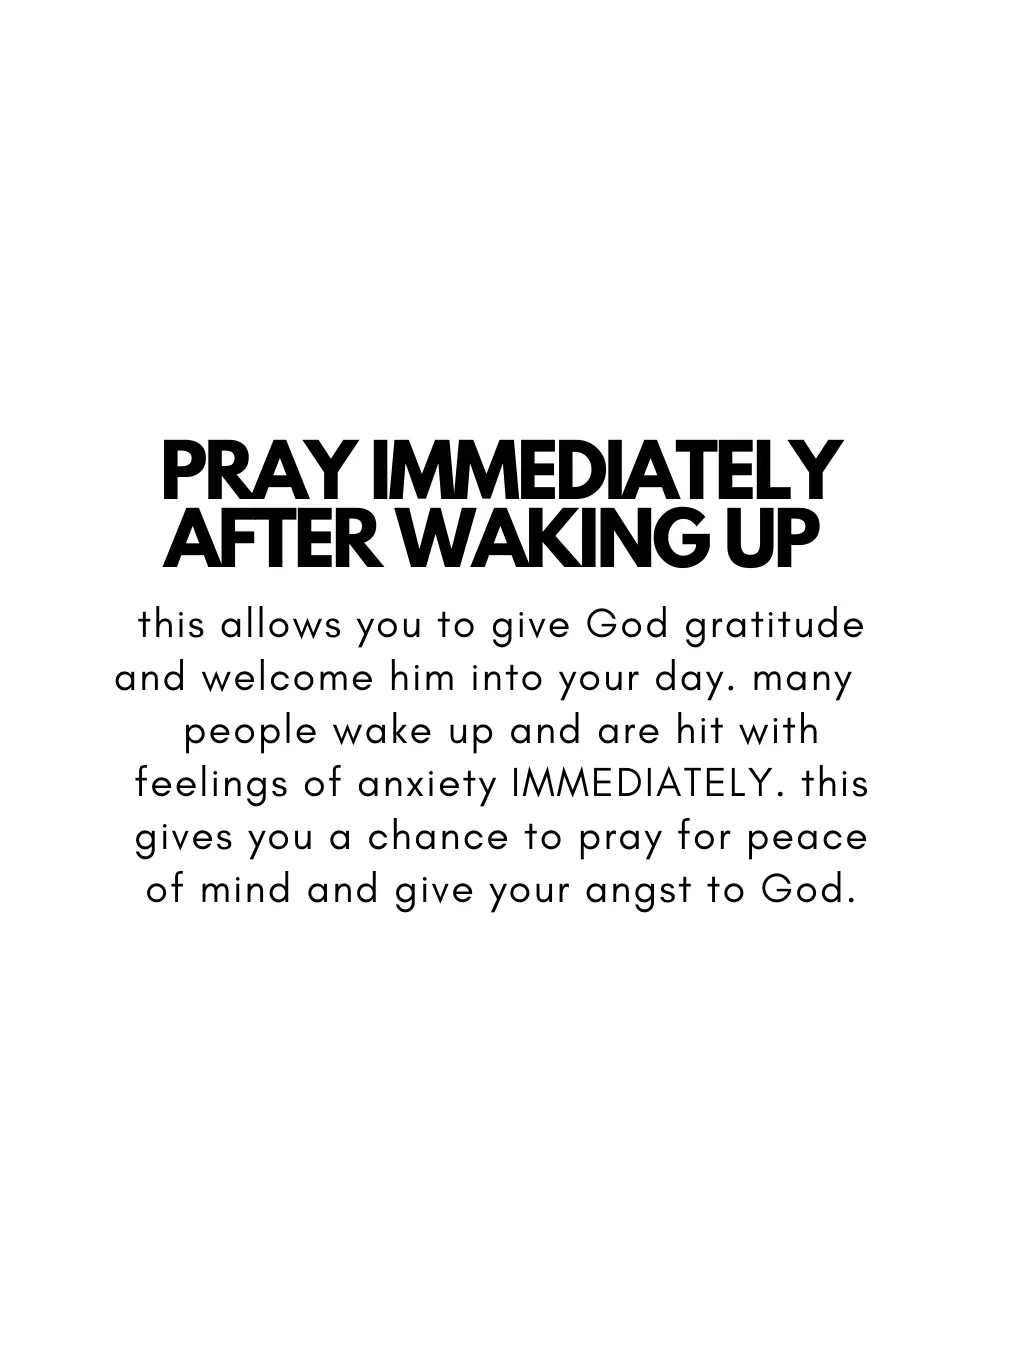  Pray immediately after waking up to give God gratitude and welcome him into your day.